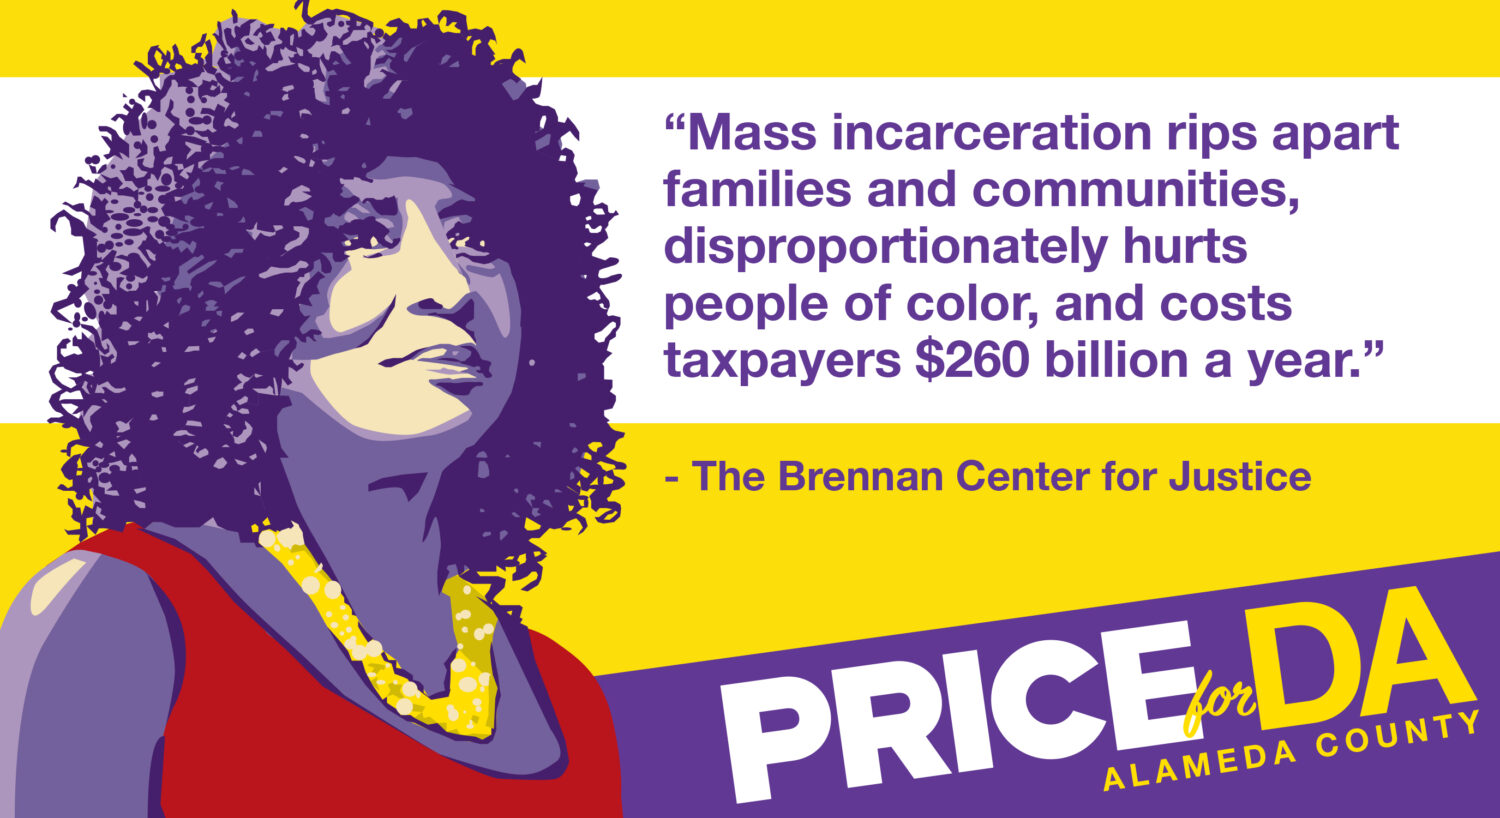 Mass incarceration rips apart families and communities, disproportionately hurts people of color, and costs taxpayers $260 billion a year.